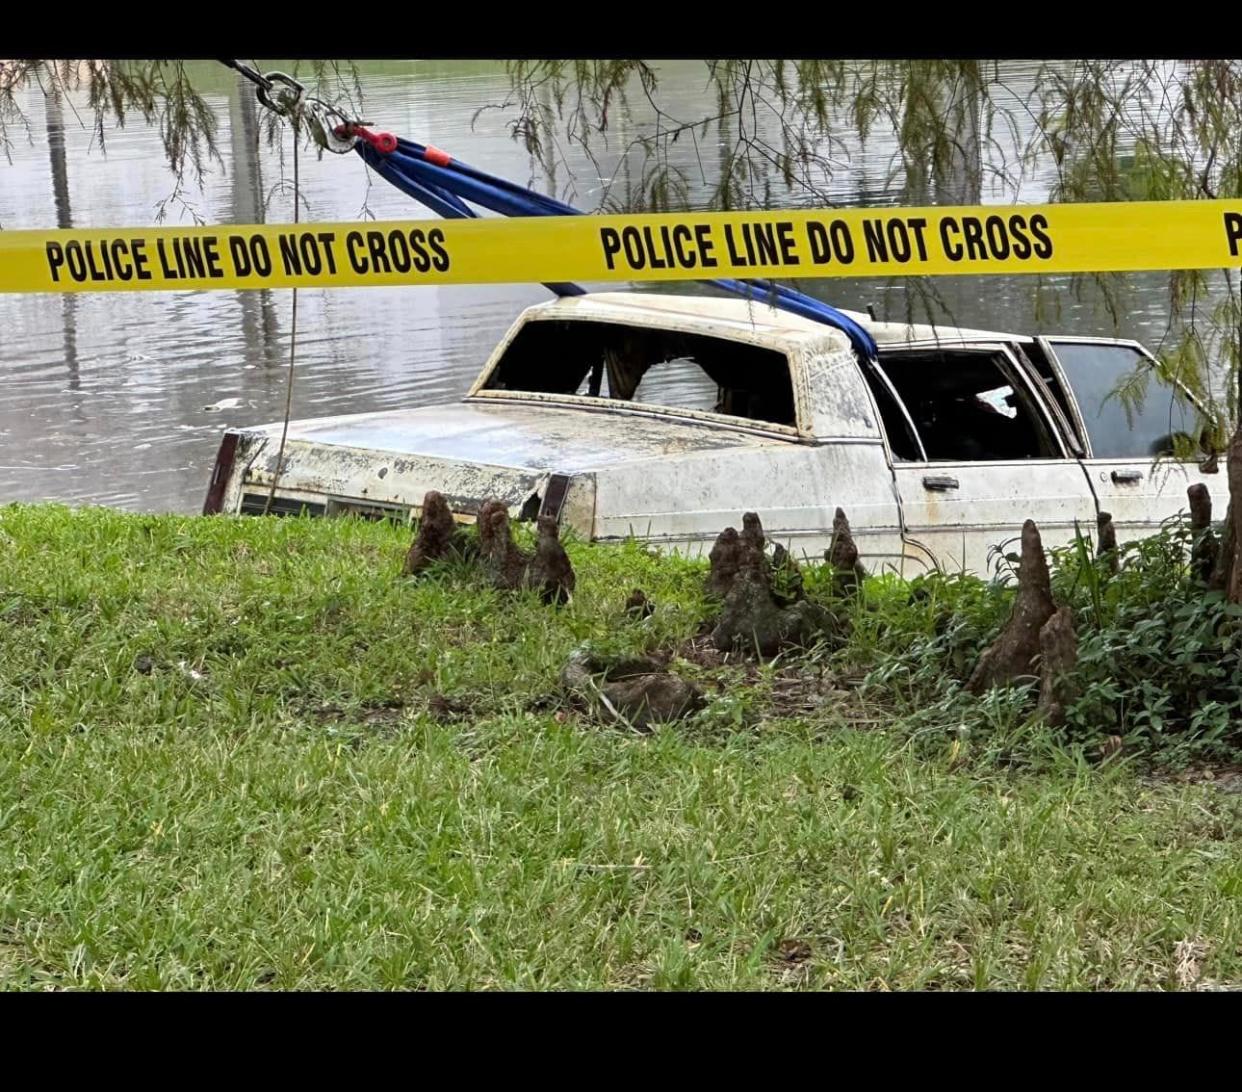 An Oldsmobile containing human remains pulled from a mall pond in Florida. Sunrise police said the car was last registered in 2005.